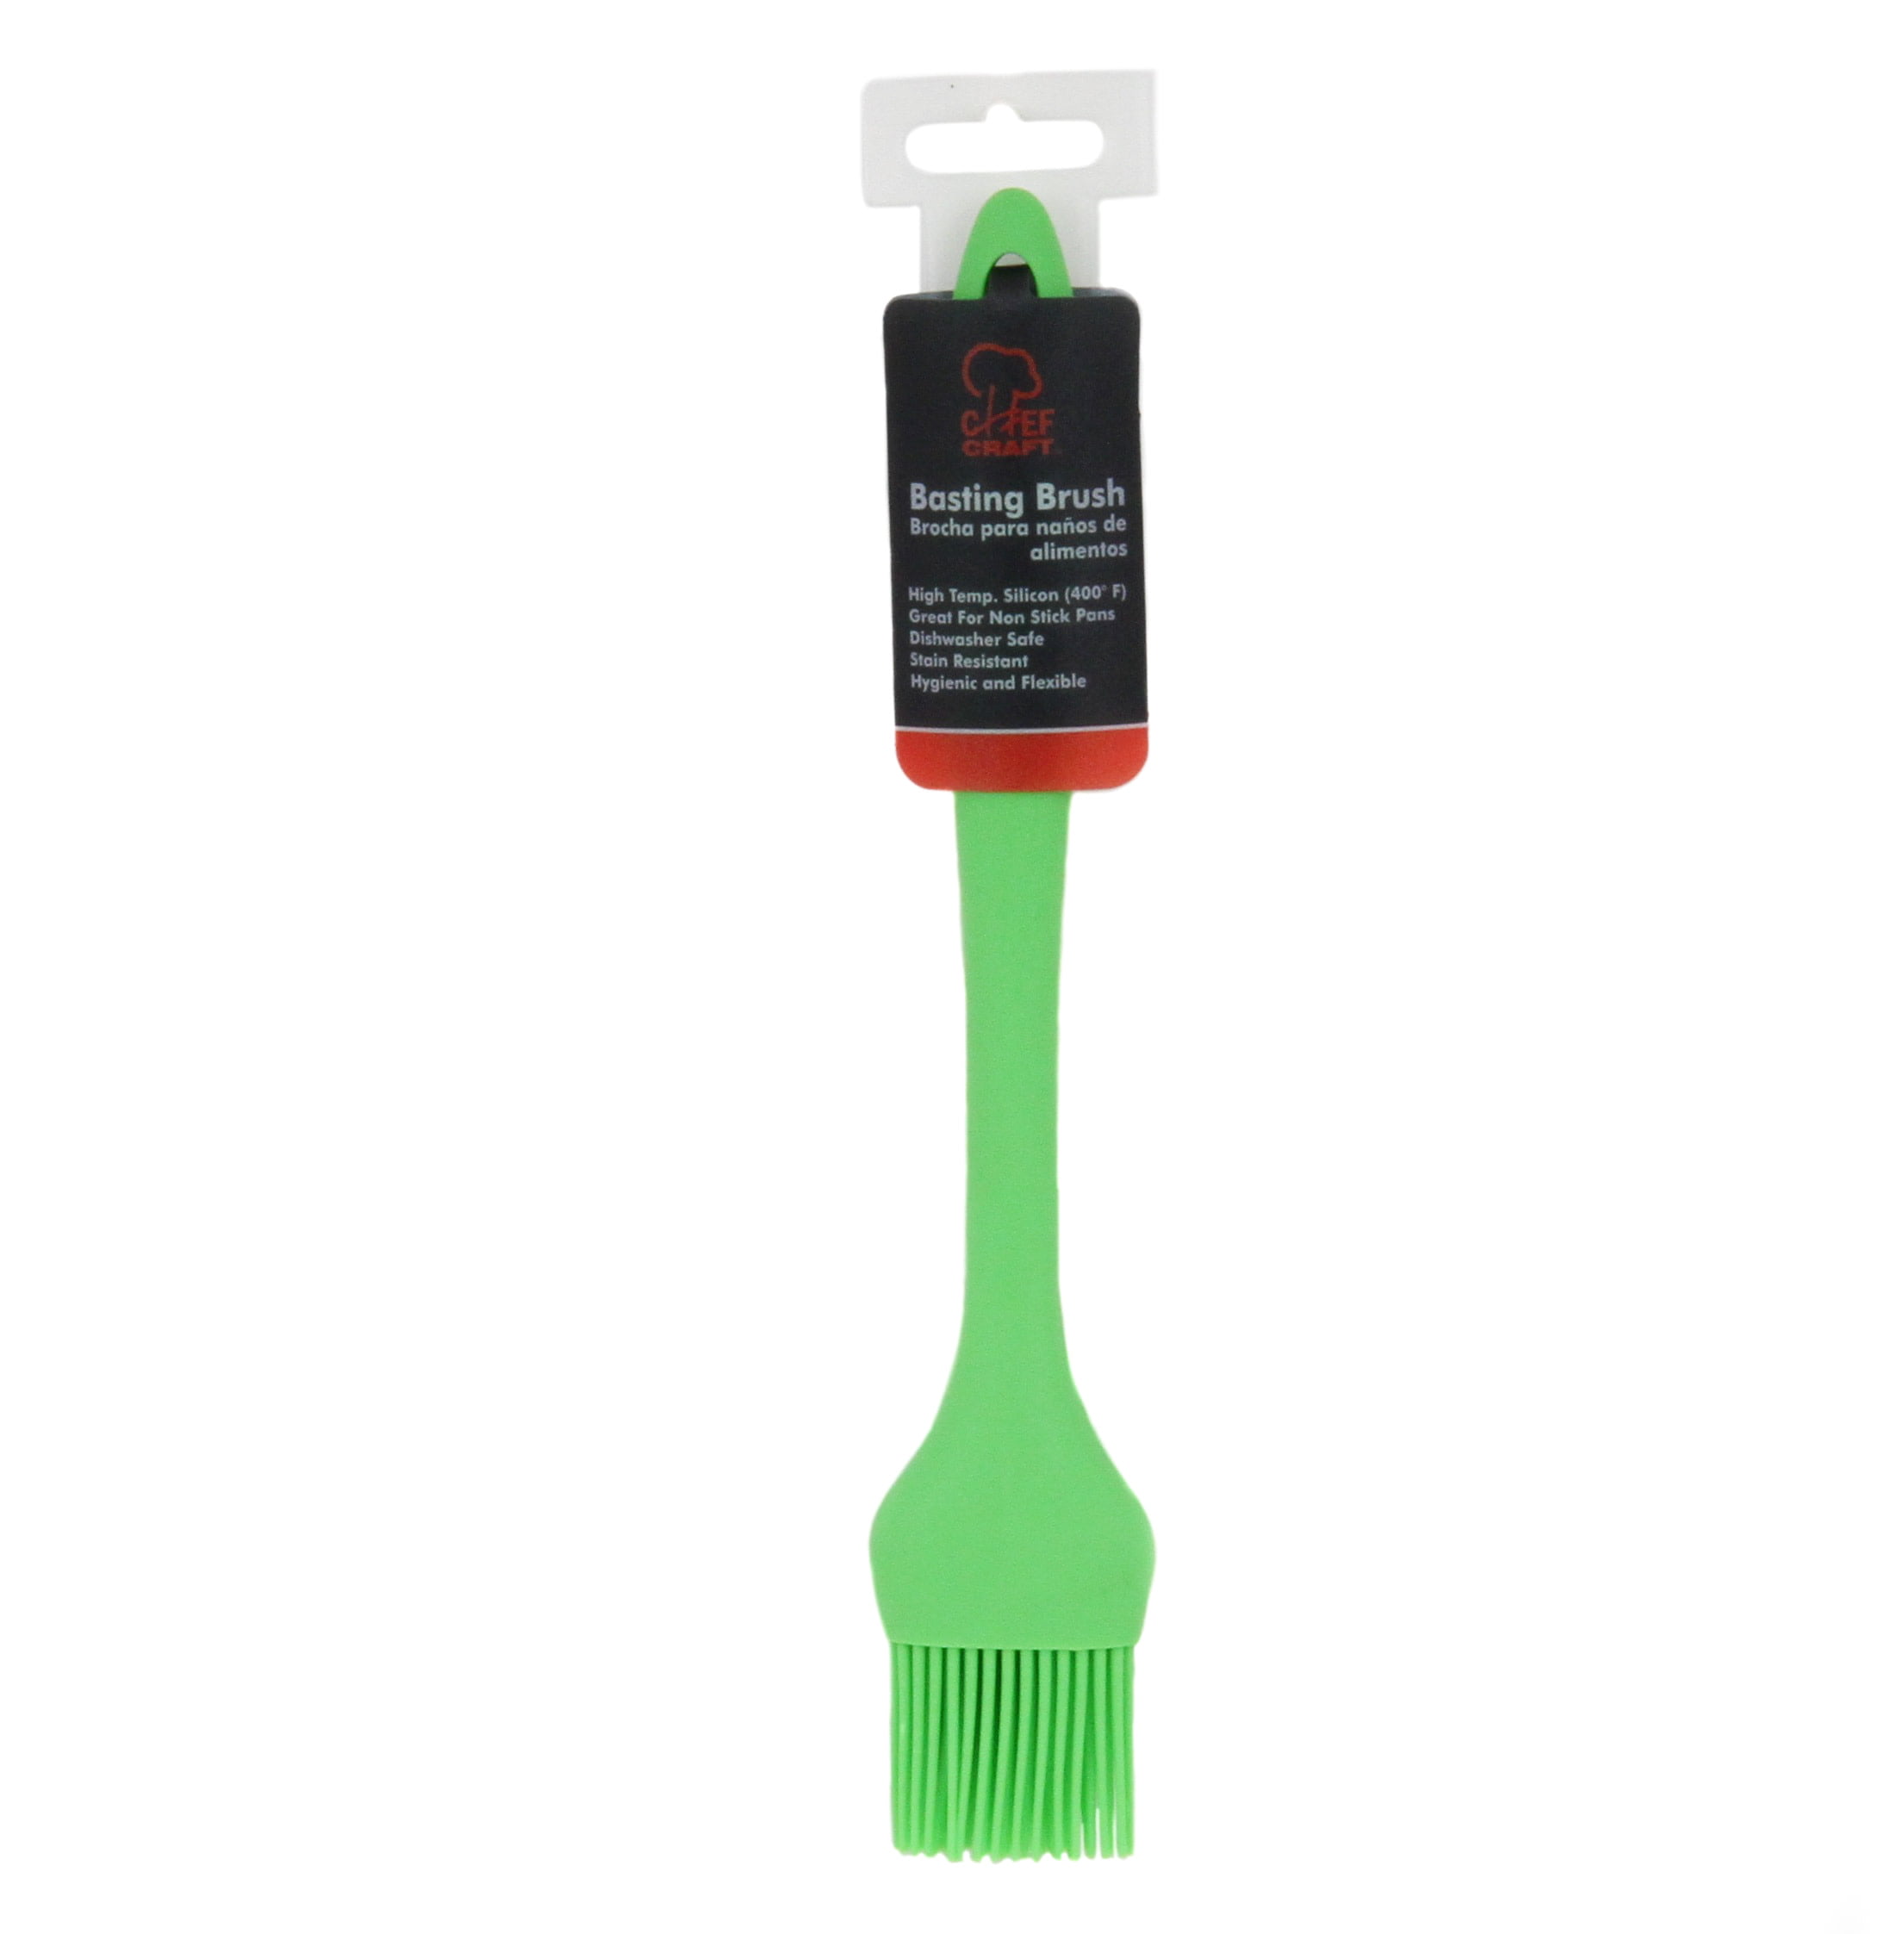 Cook's Kitchen 8251 Basting Brush with Green Plastic Handles, 2